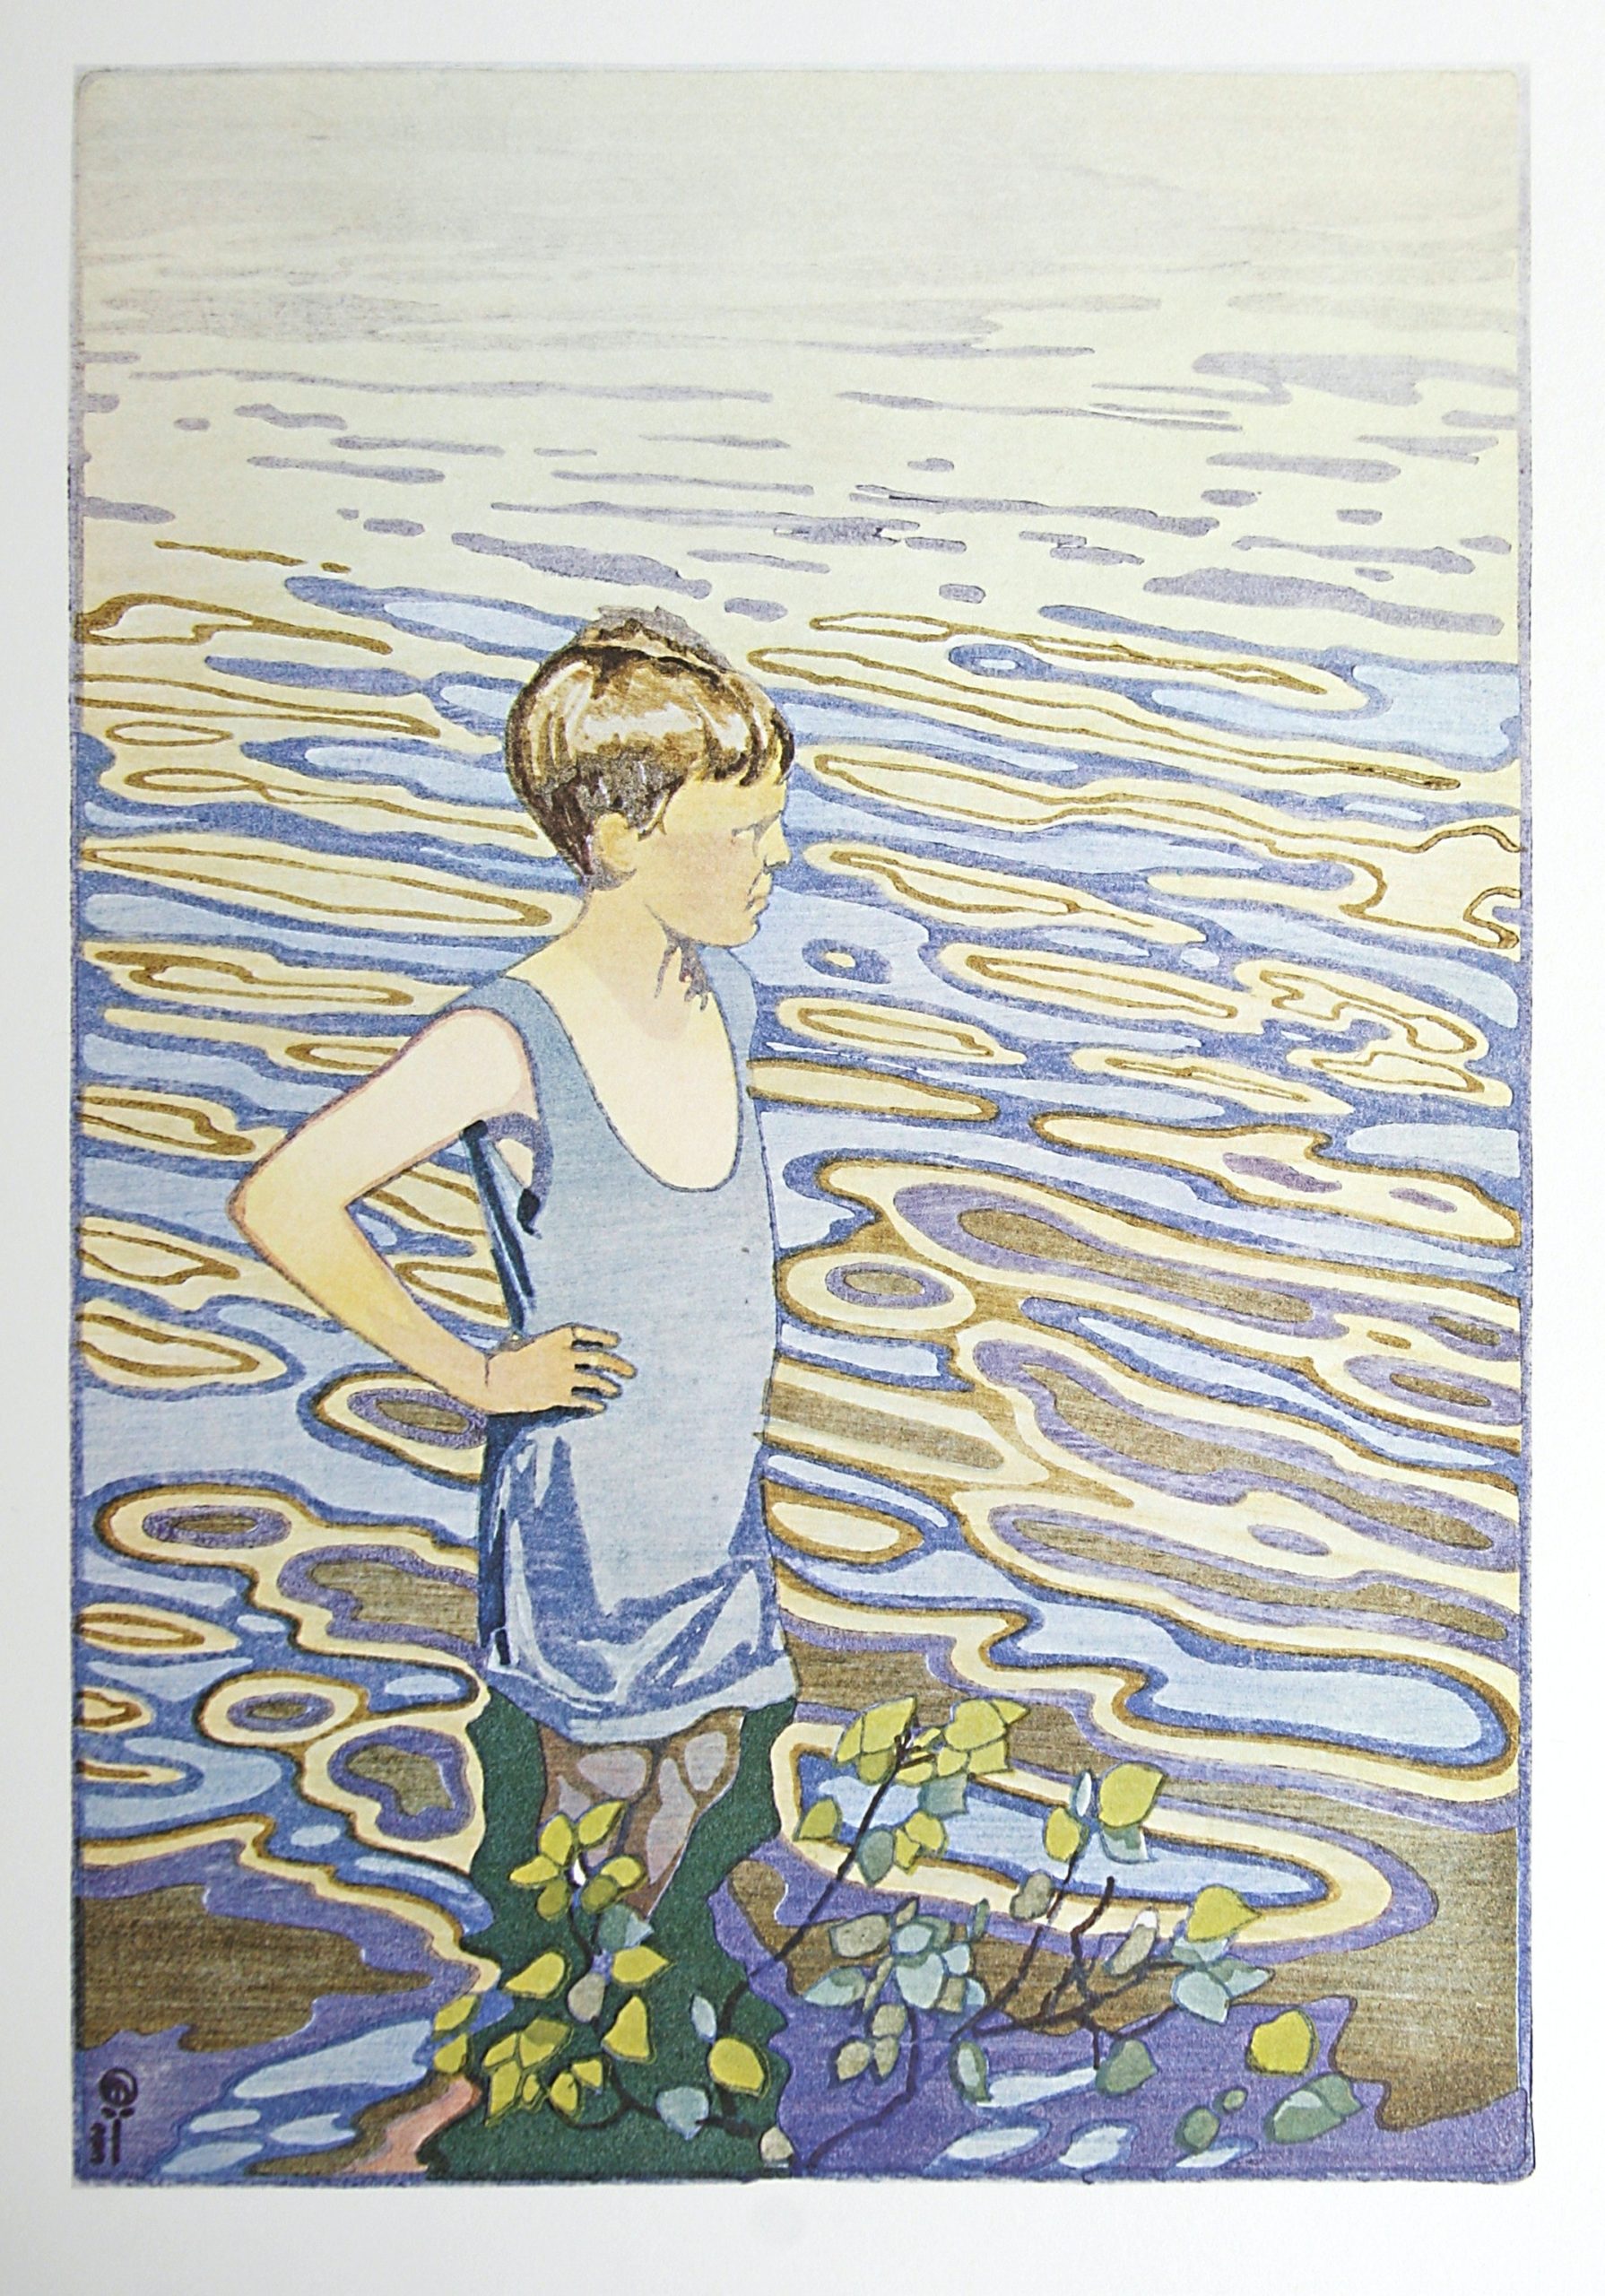 The Bather by WJ Phillips